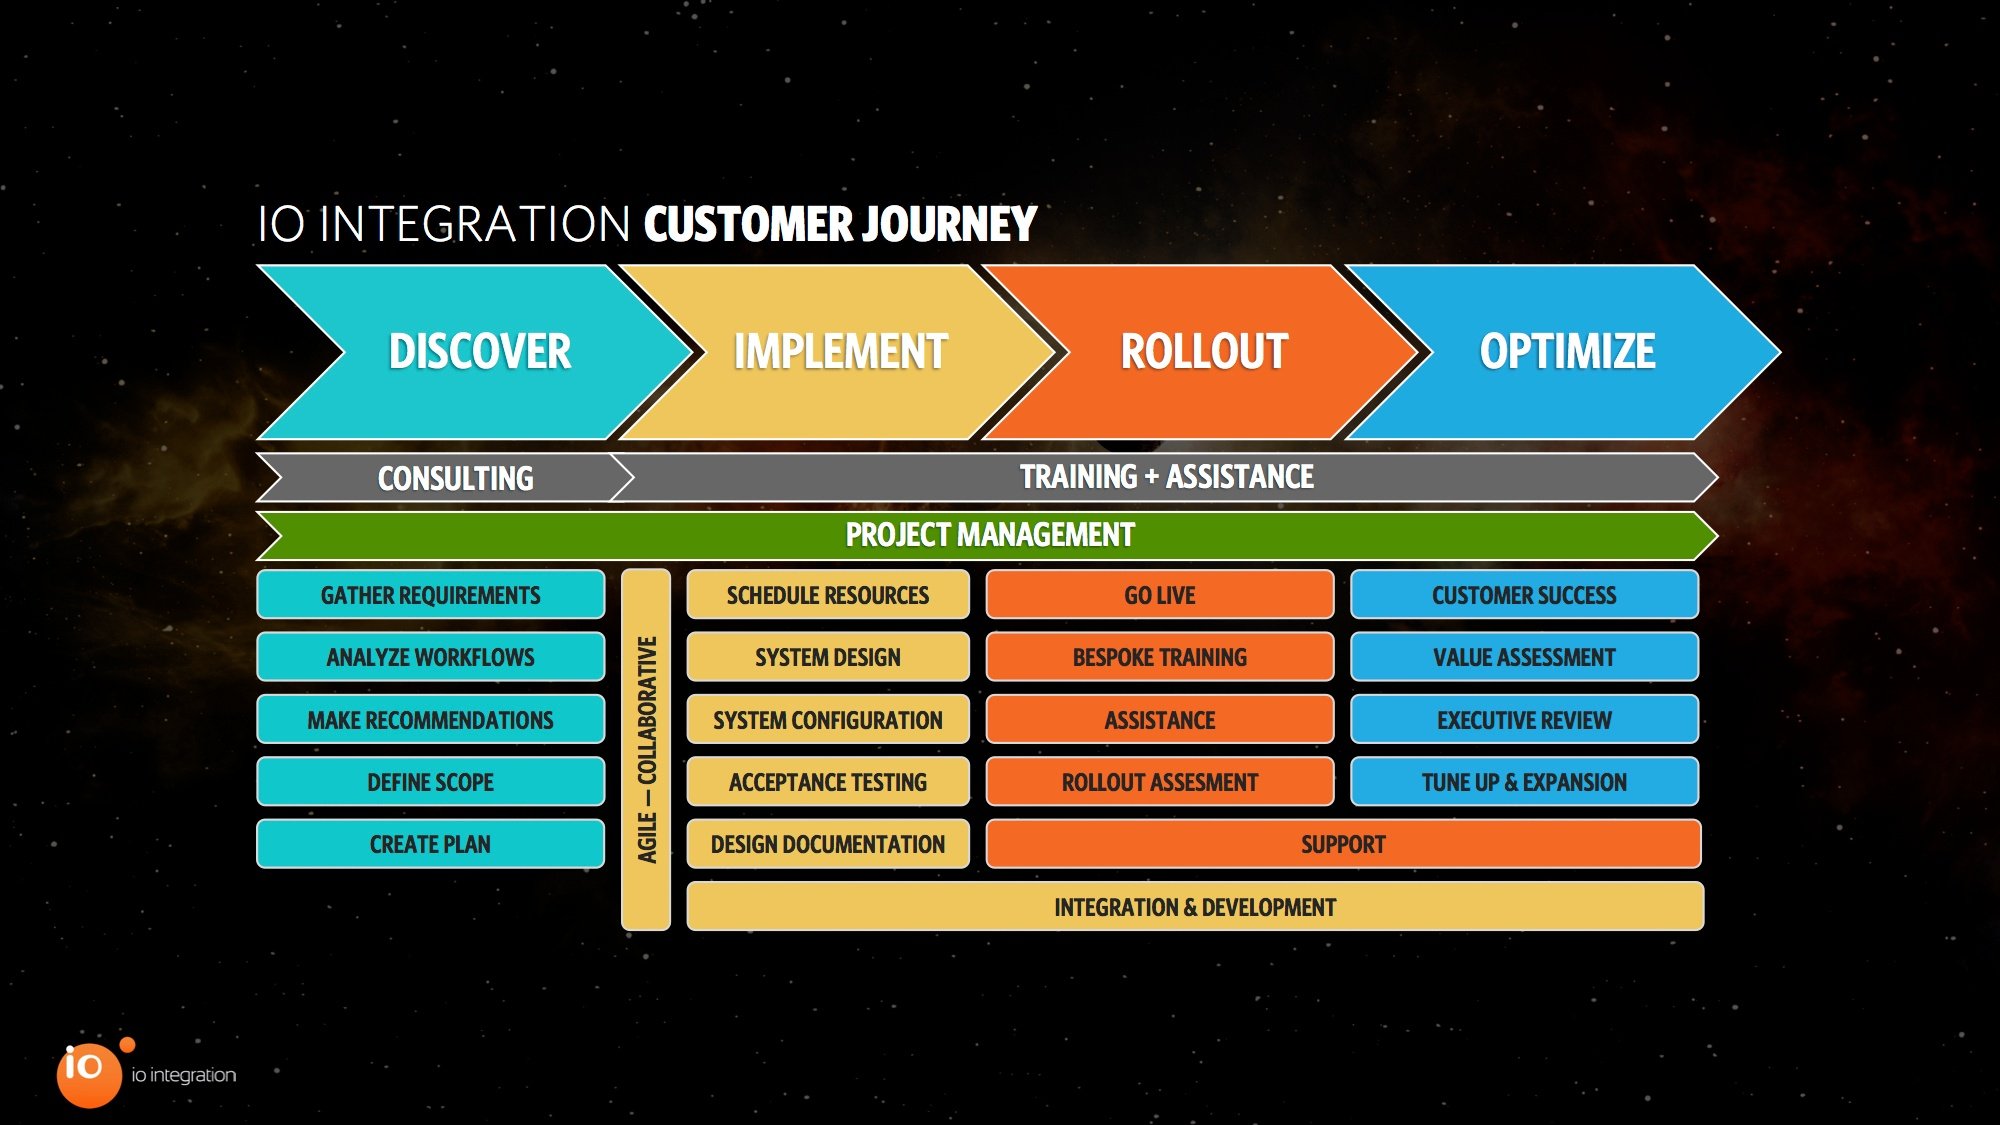 Welcome to the IO Integration Customer Journey